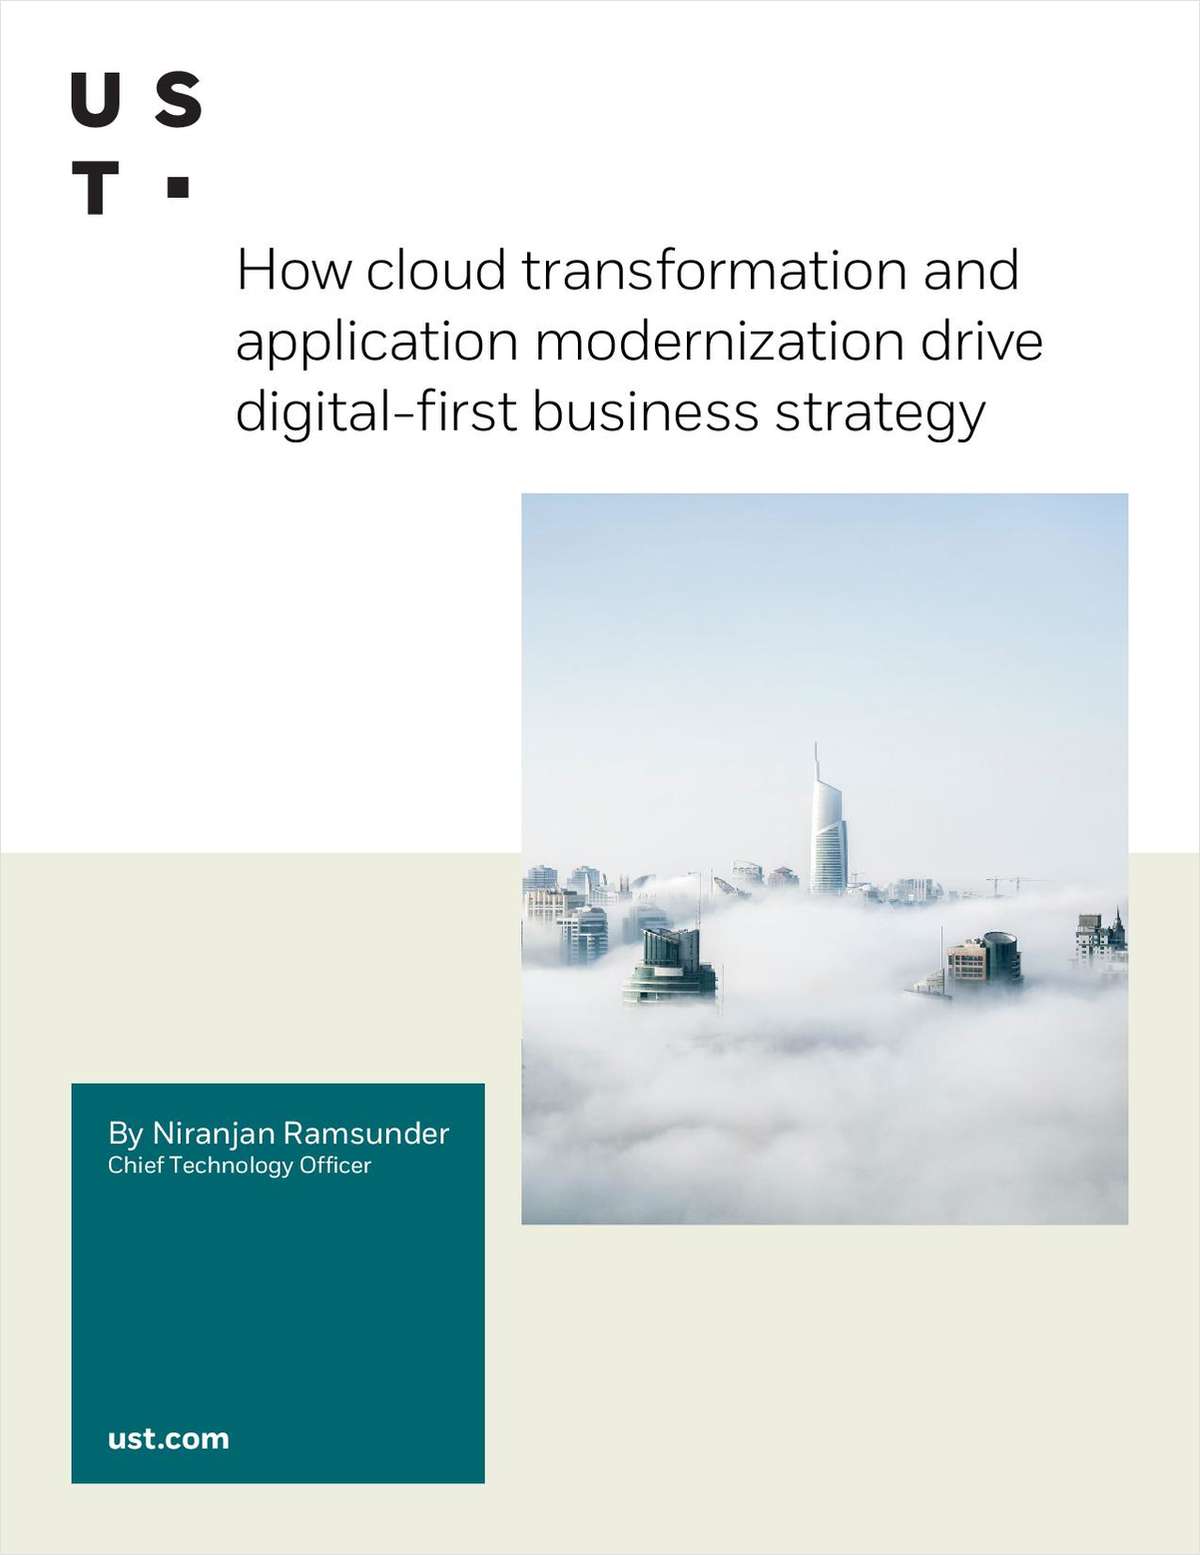 How cloud transformation and application modernization drive digital-first business strategy